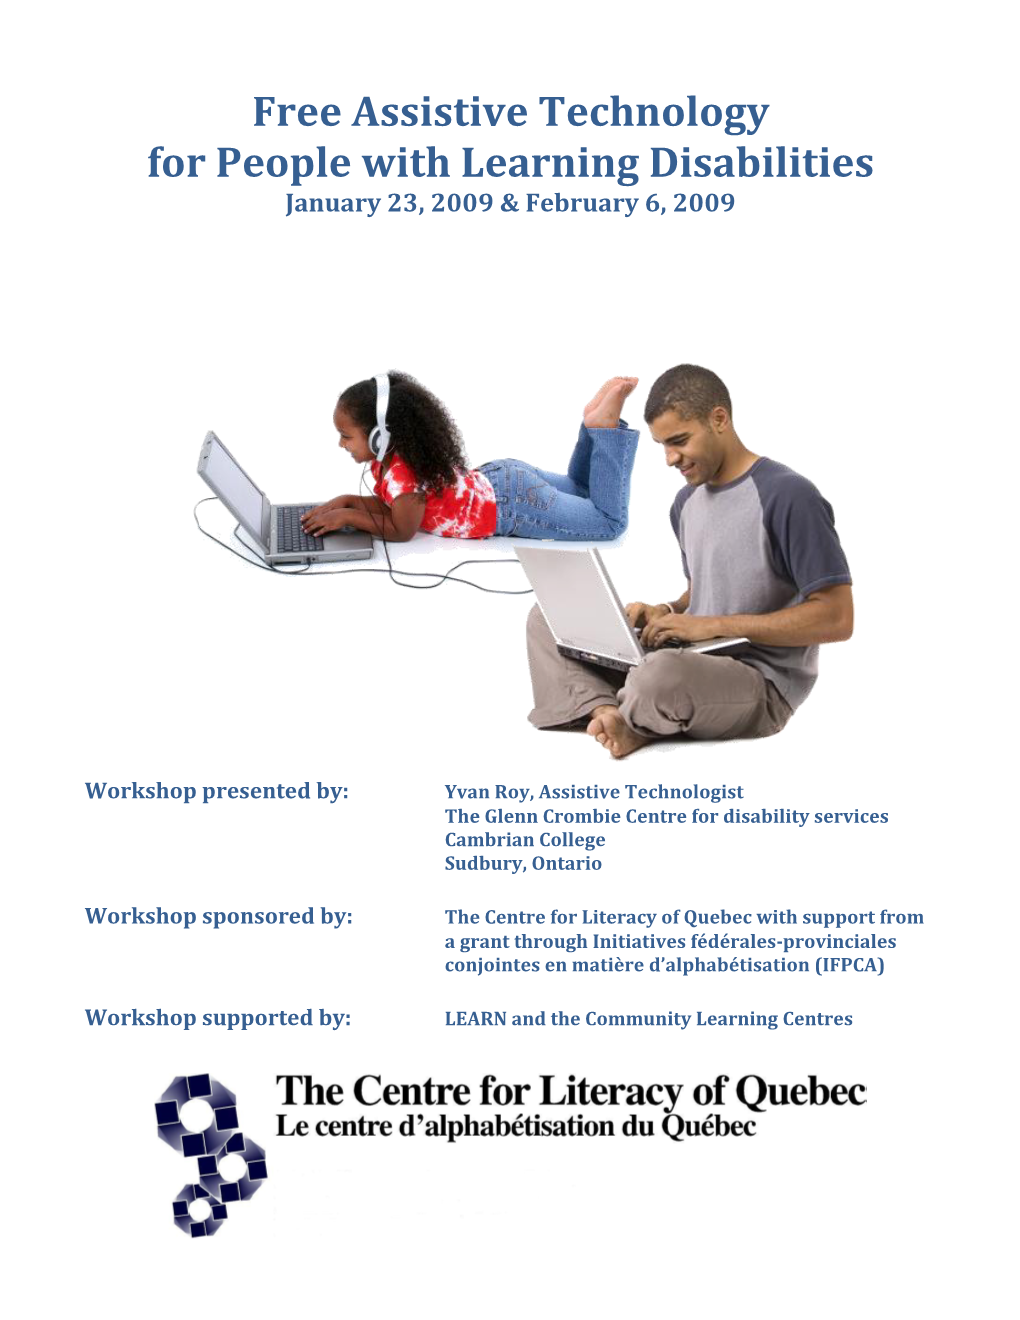 Free Assistive Technology for People with Learning Disabilities January 23, 2009 & February 6, 2009